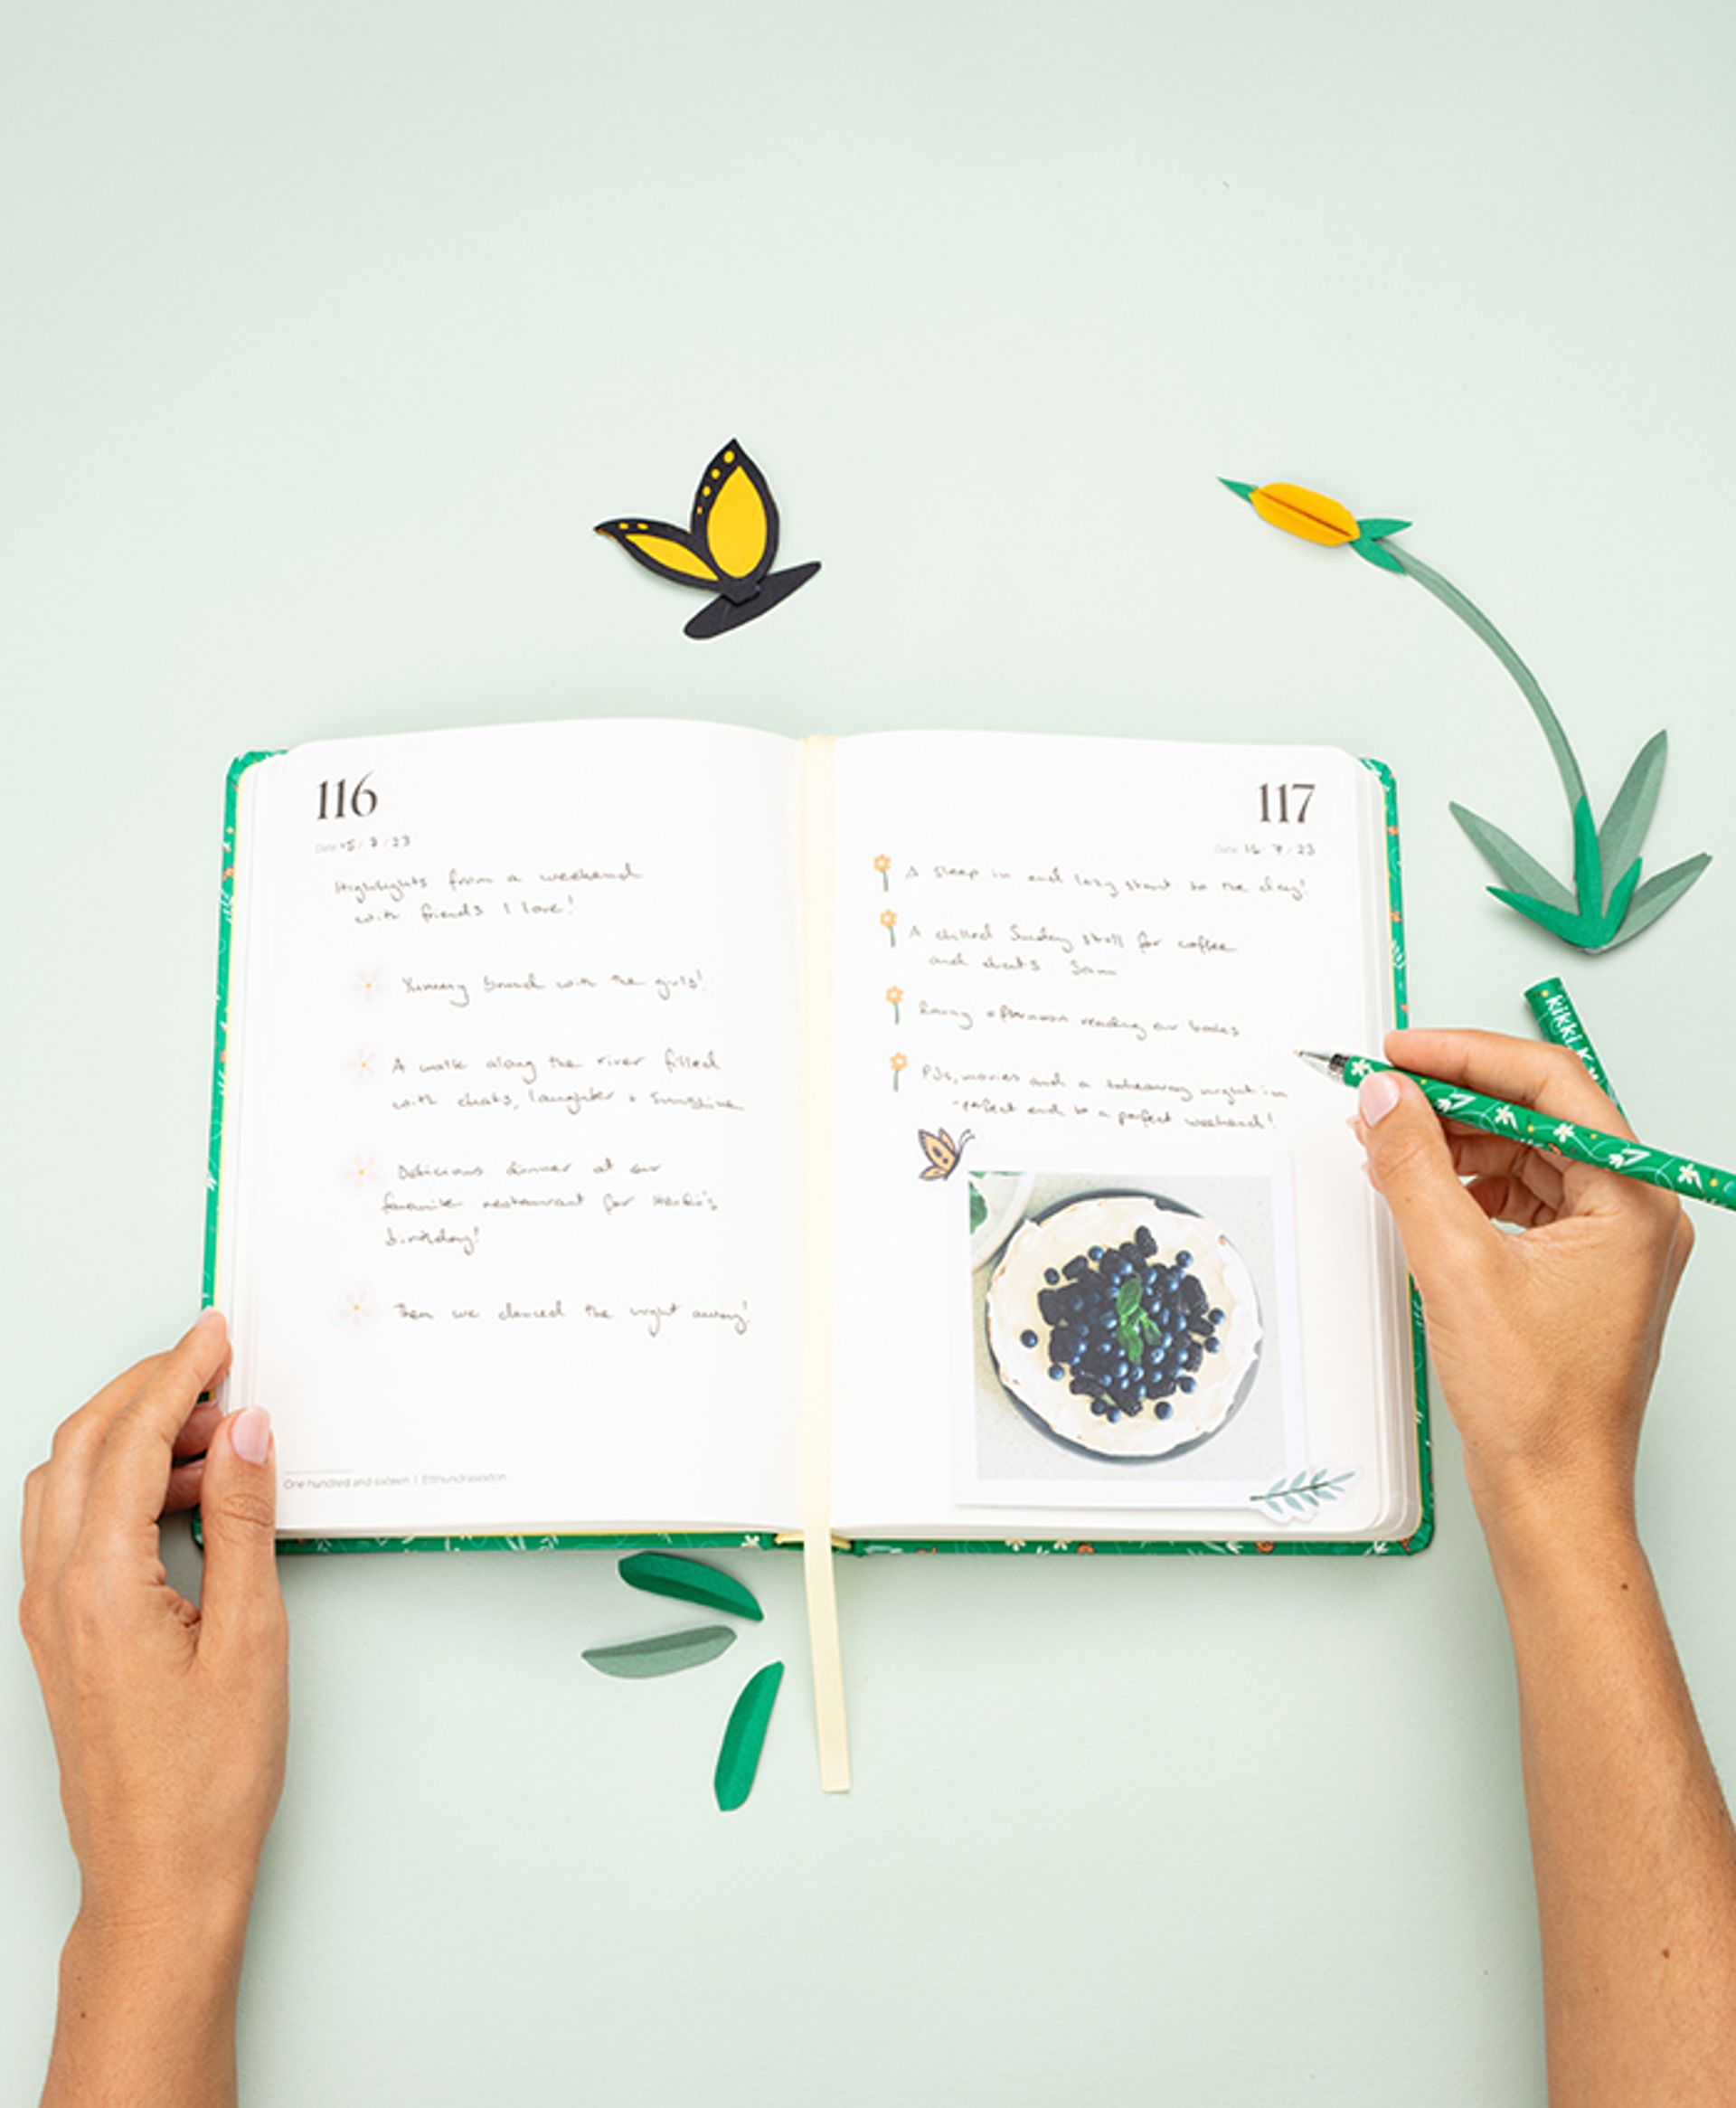 Where imagination takes flight: An introduction to journaling 